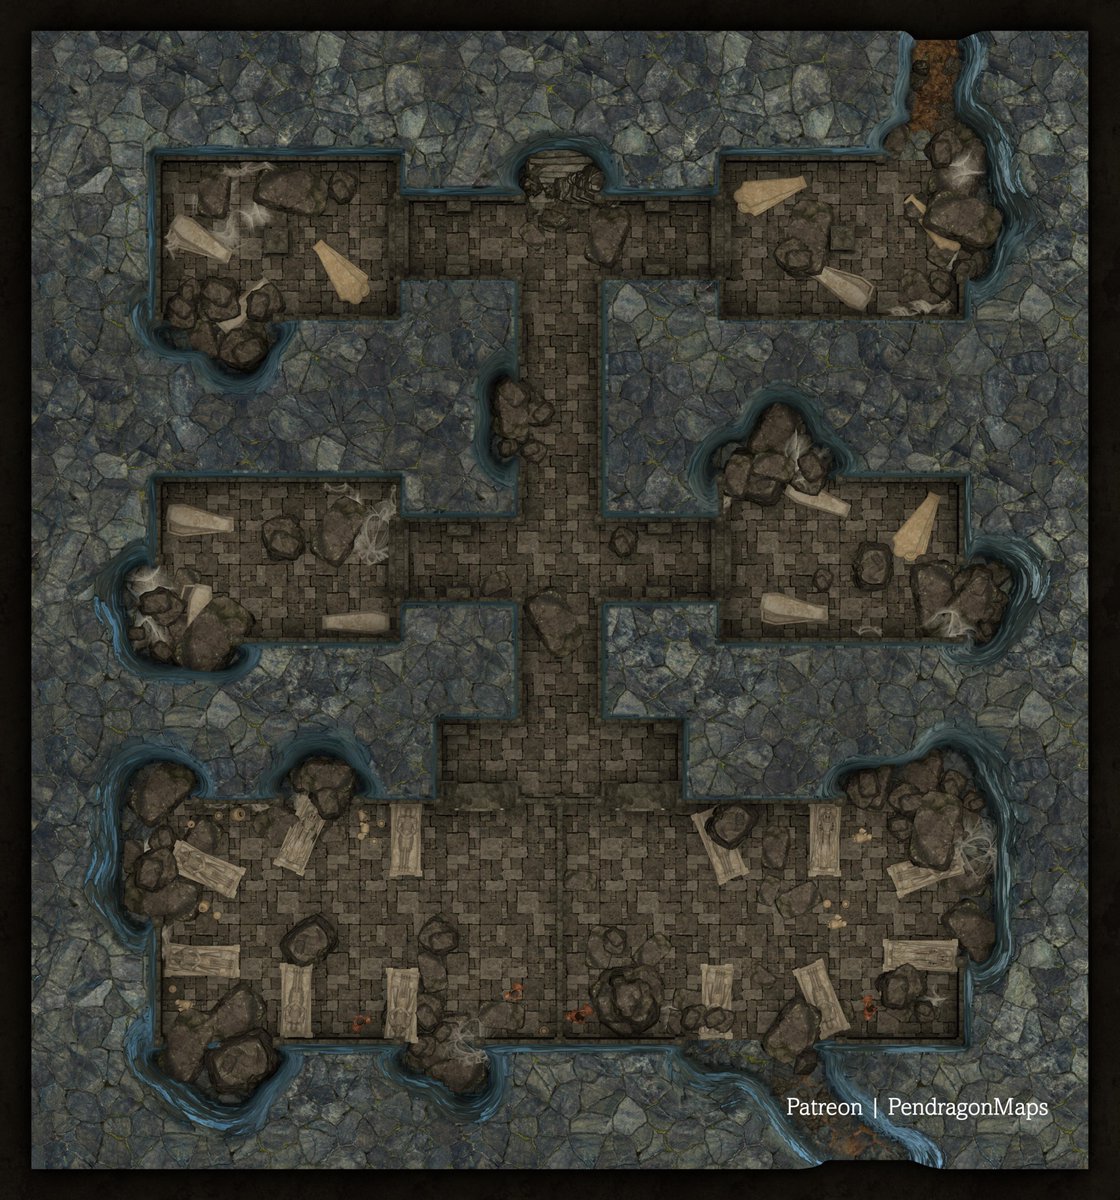 Ancient Crypt is available free at our Patreon. Join for free and get notified when new maps or adventures are posted.

#battlemap #dnd #pathfinder #fantasyrpg #roll20 #fantasygrounds #foundryvtt #dungeonsanddragons #ttrpg #battlemaps #fantasymaps #dungeonalchemist #criticalrole